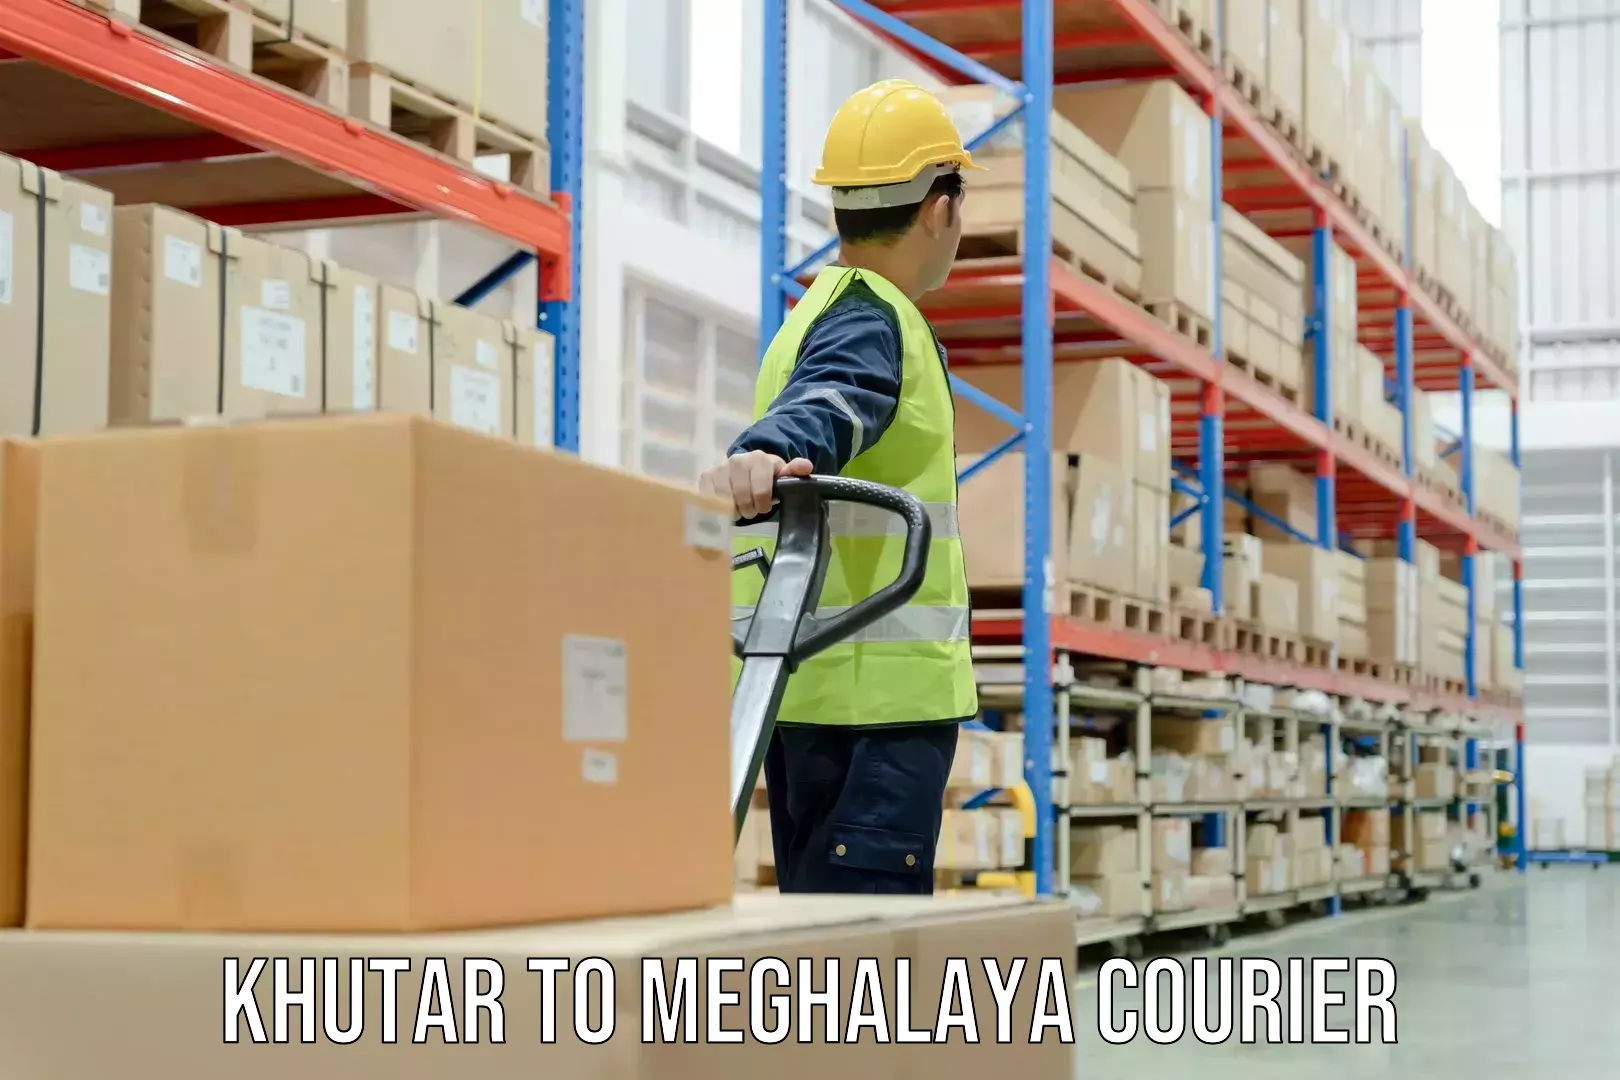 Nationwide delivery network Khutar to Meghalaya